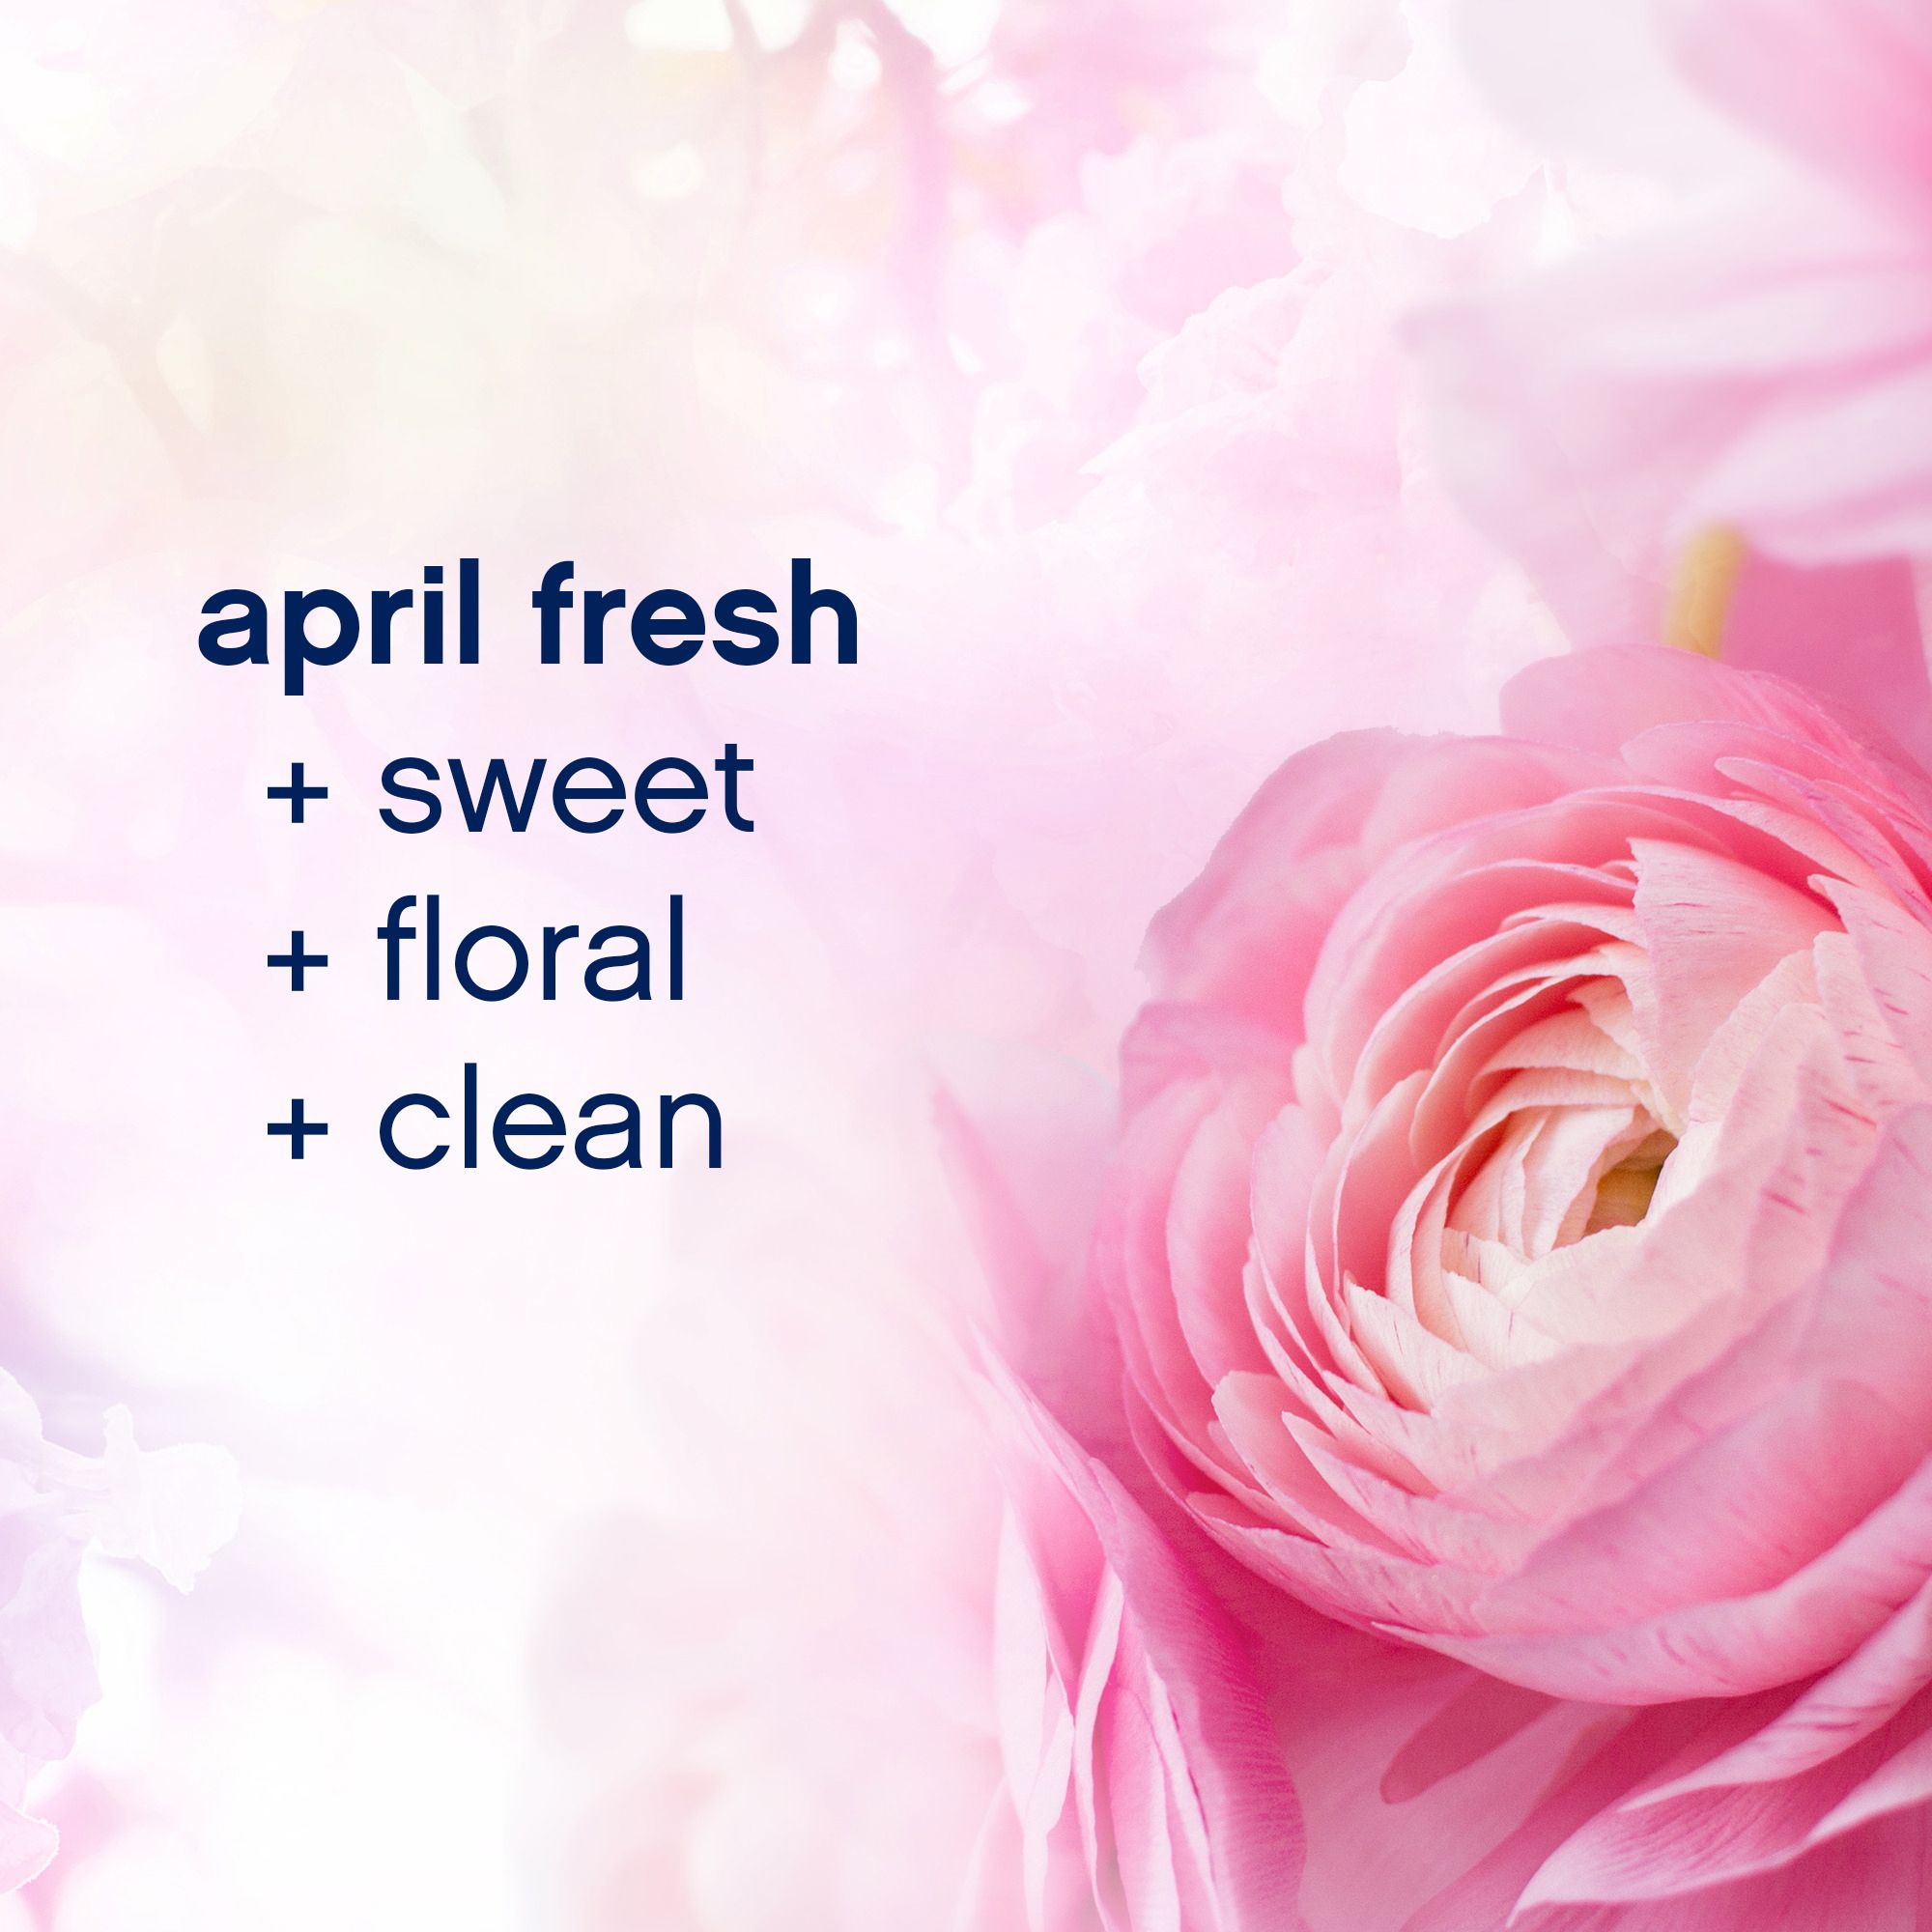 Downy Unstopables with Febreze - Spring Scent